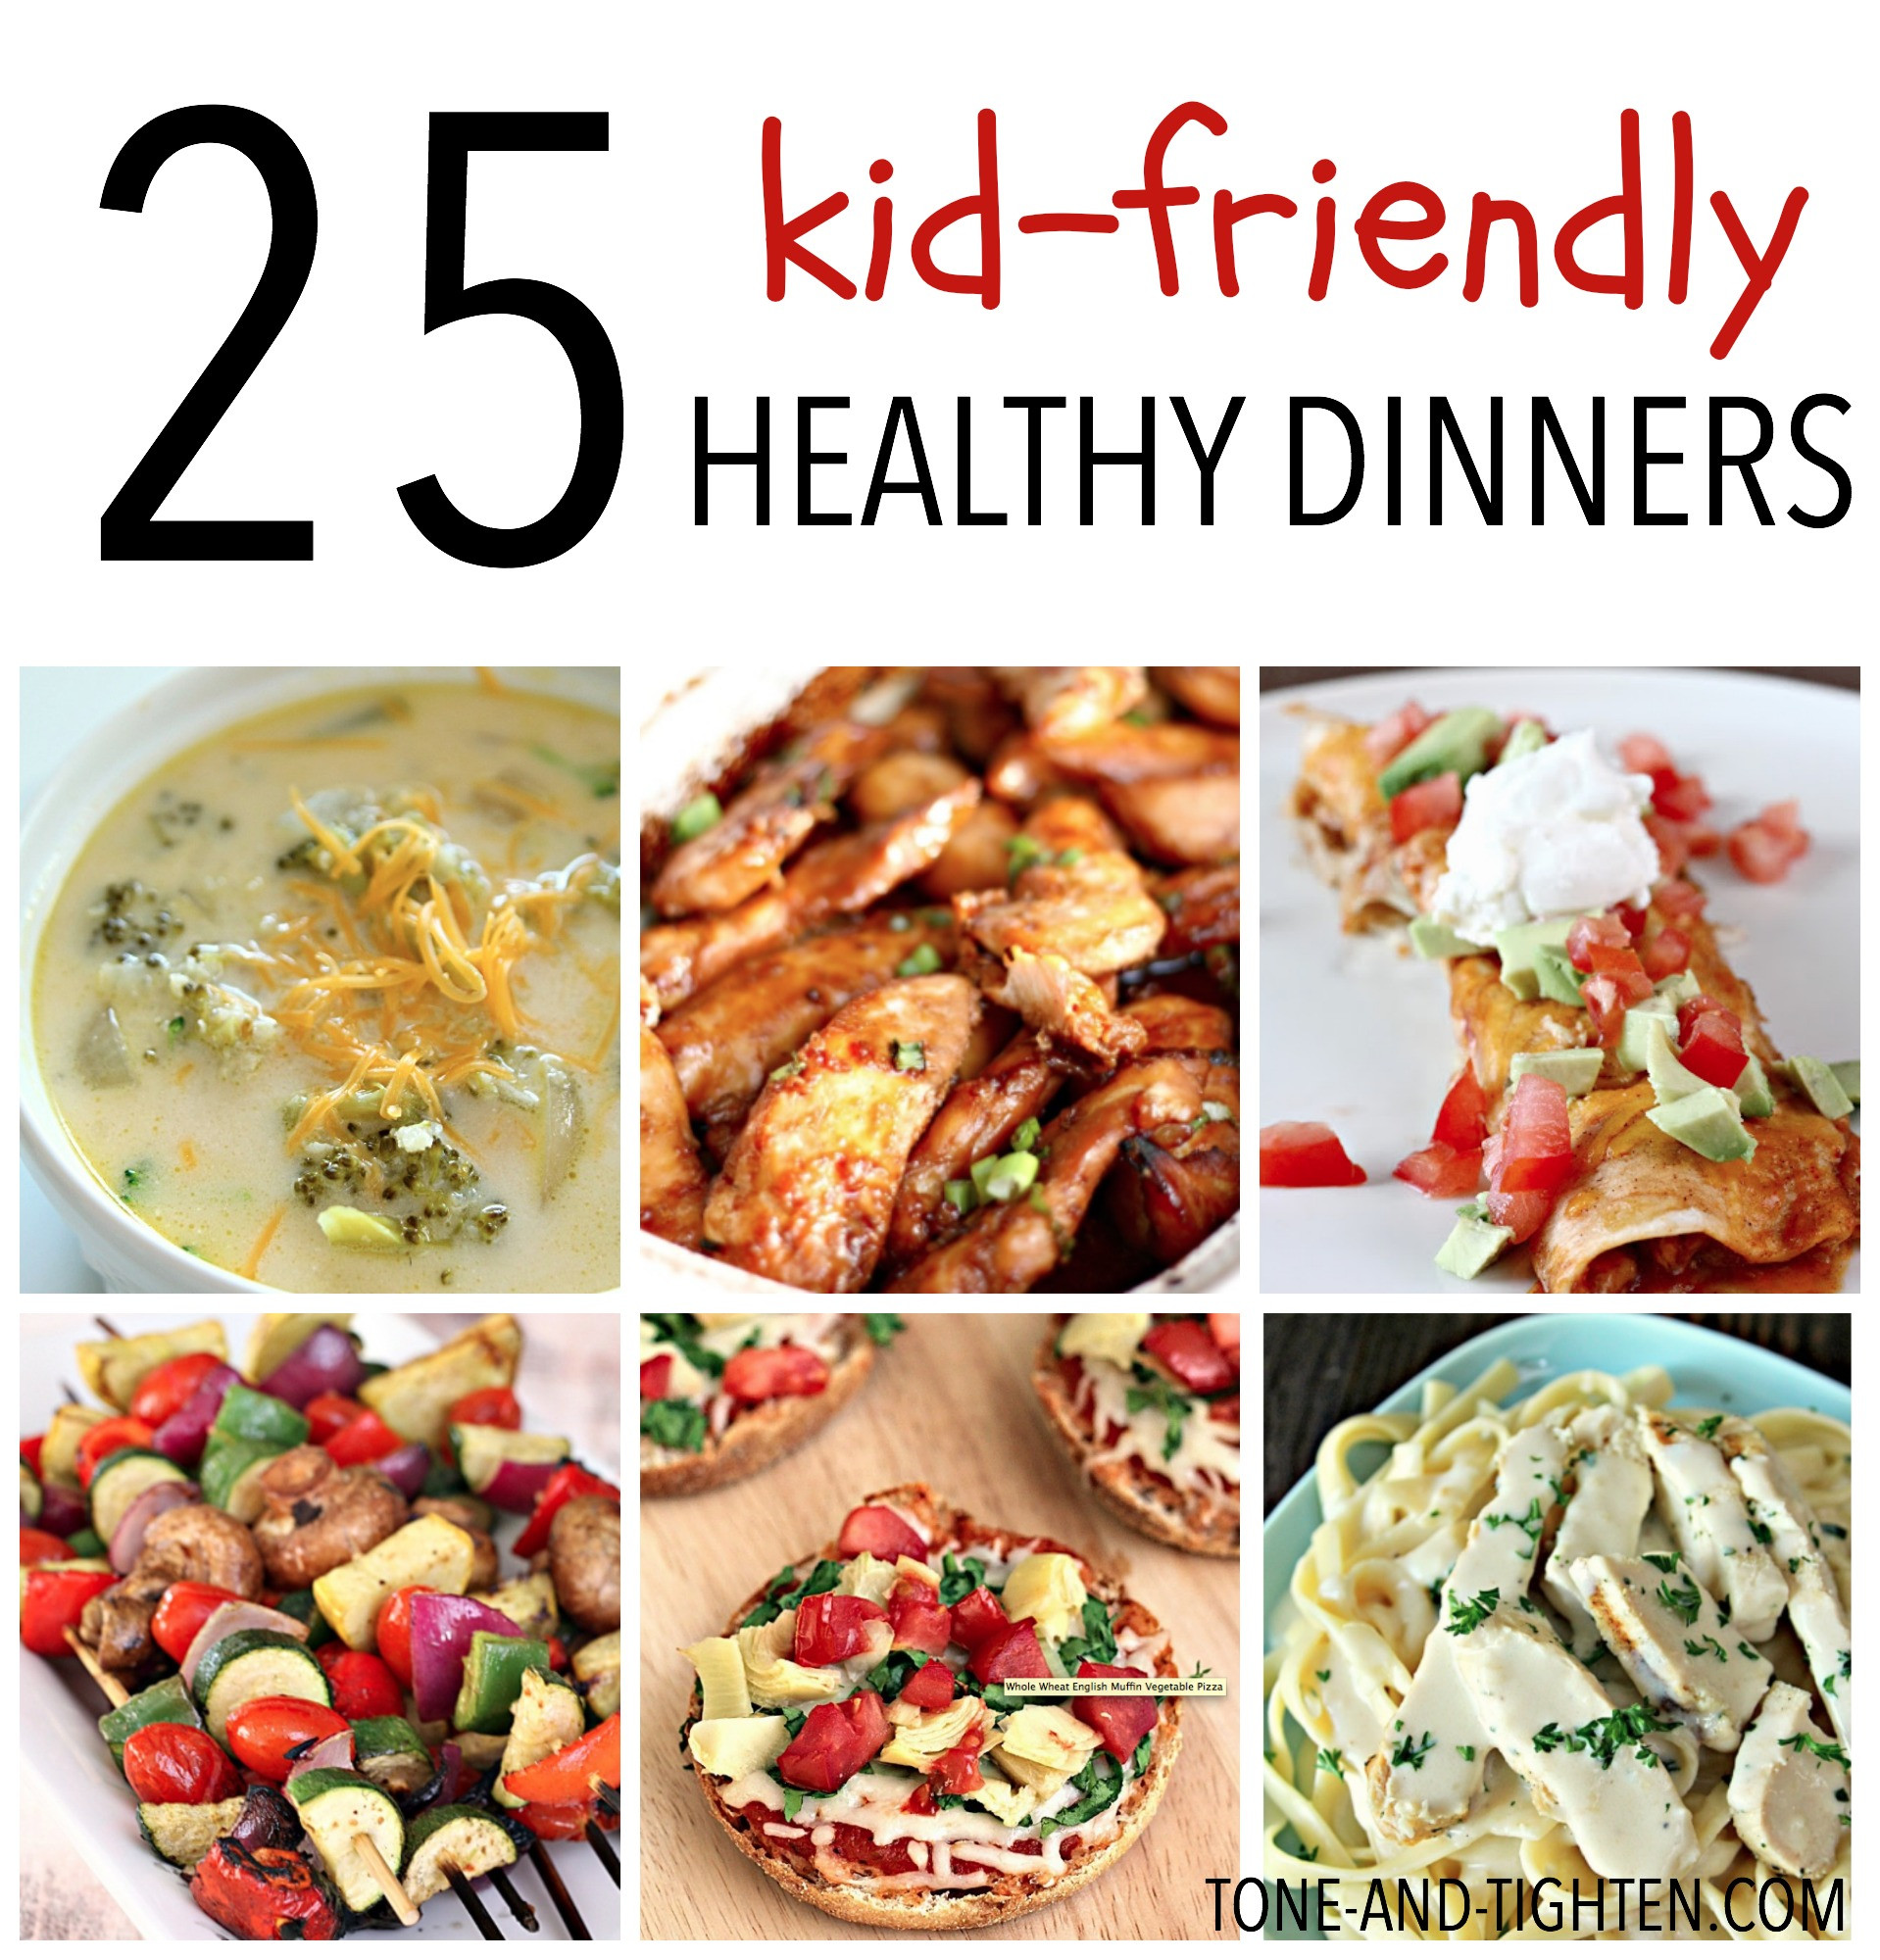 Kid Friendly Meals For Dinner
 25 Kid Friendly Healthy Dinners